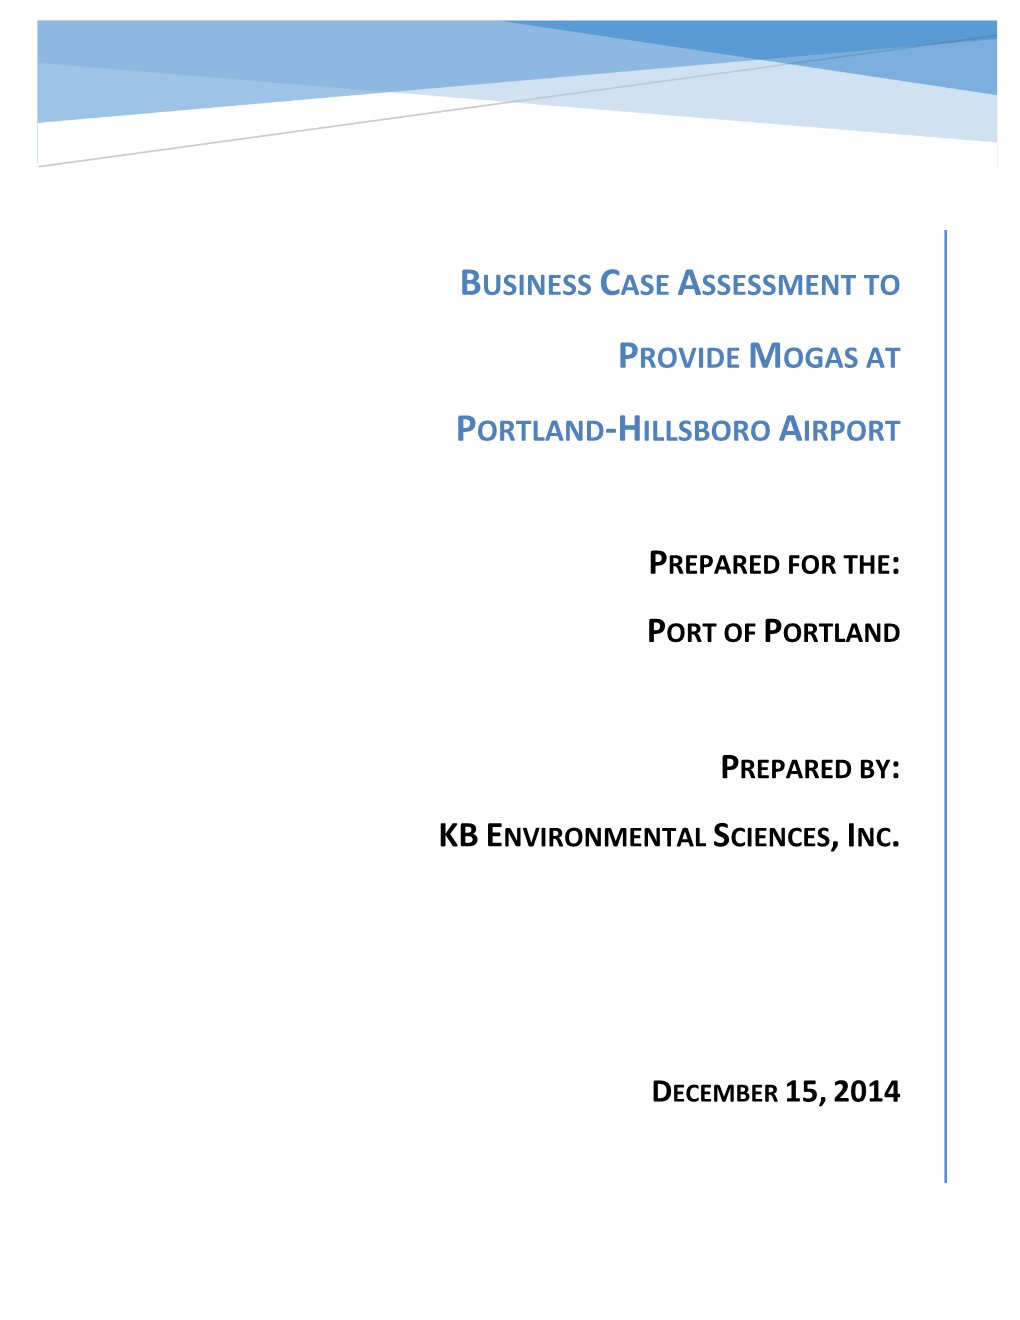 Business Case Assessment to Provide Mogas at Portland